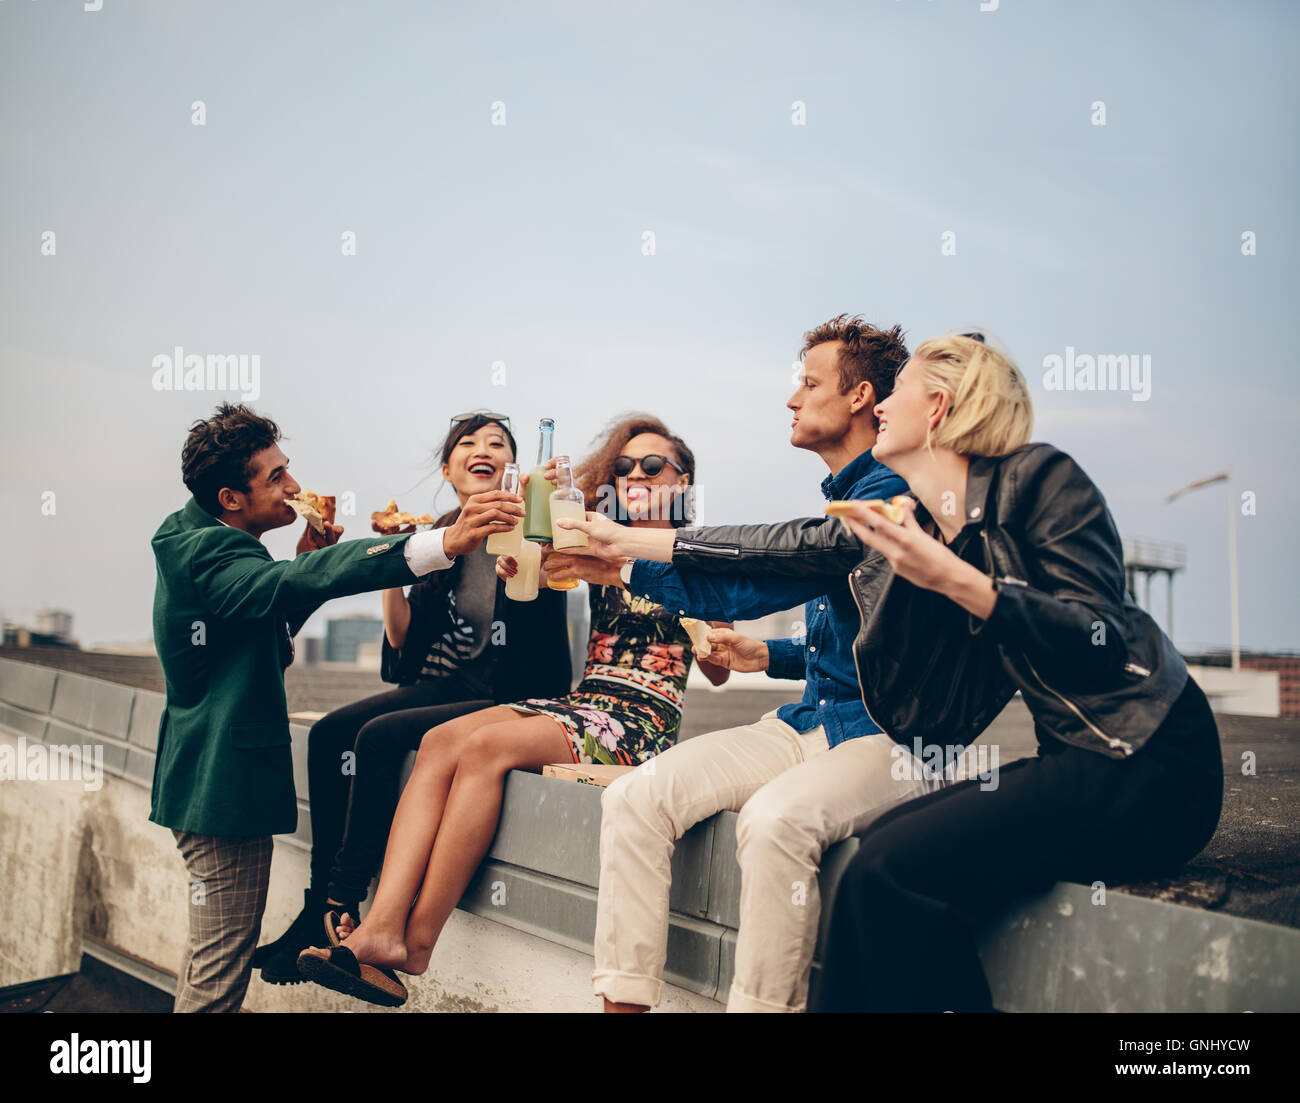 Multiethnic group of young adults on terrace, drinking and celebrating. Young men and women having drinks on rooftop party. Stock Photo